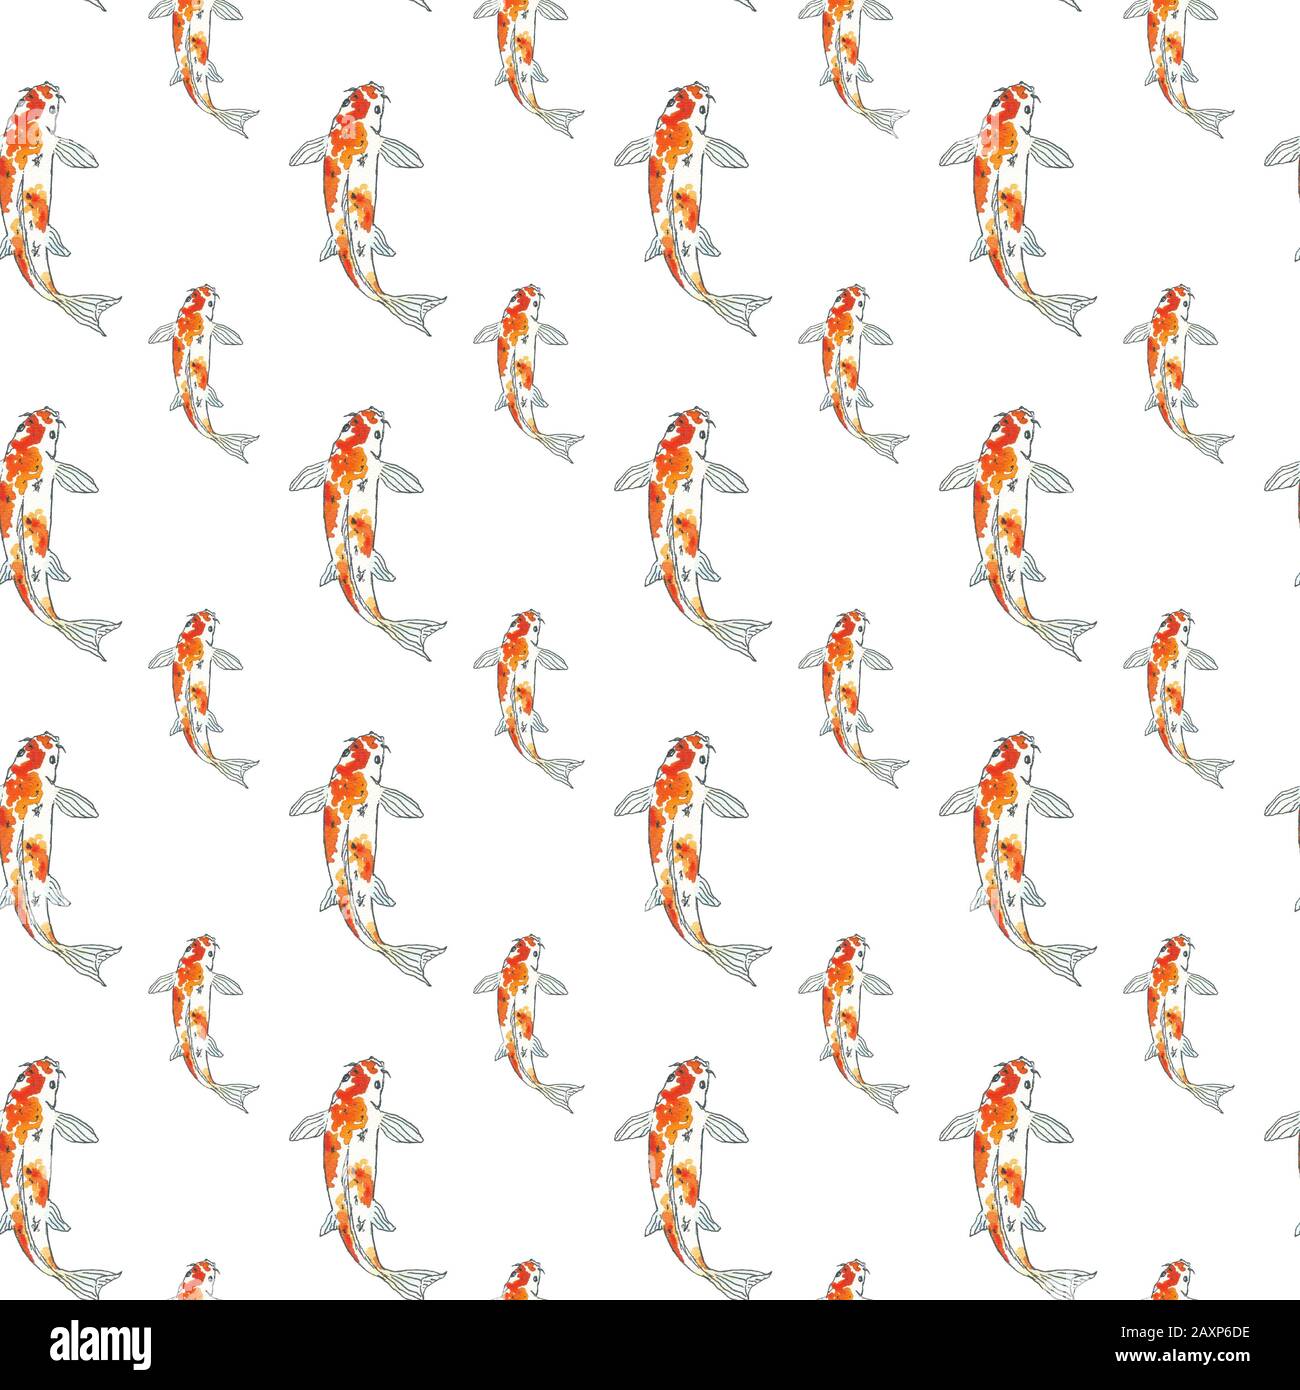 Seamless pattern of koi fish. Hand drawing sketch on white background. Watercolor illustration can be used in greeting cards, posters, flyers, banners, logo, further design etc. Stock Photo